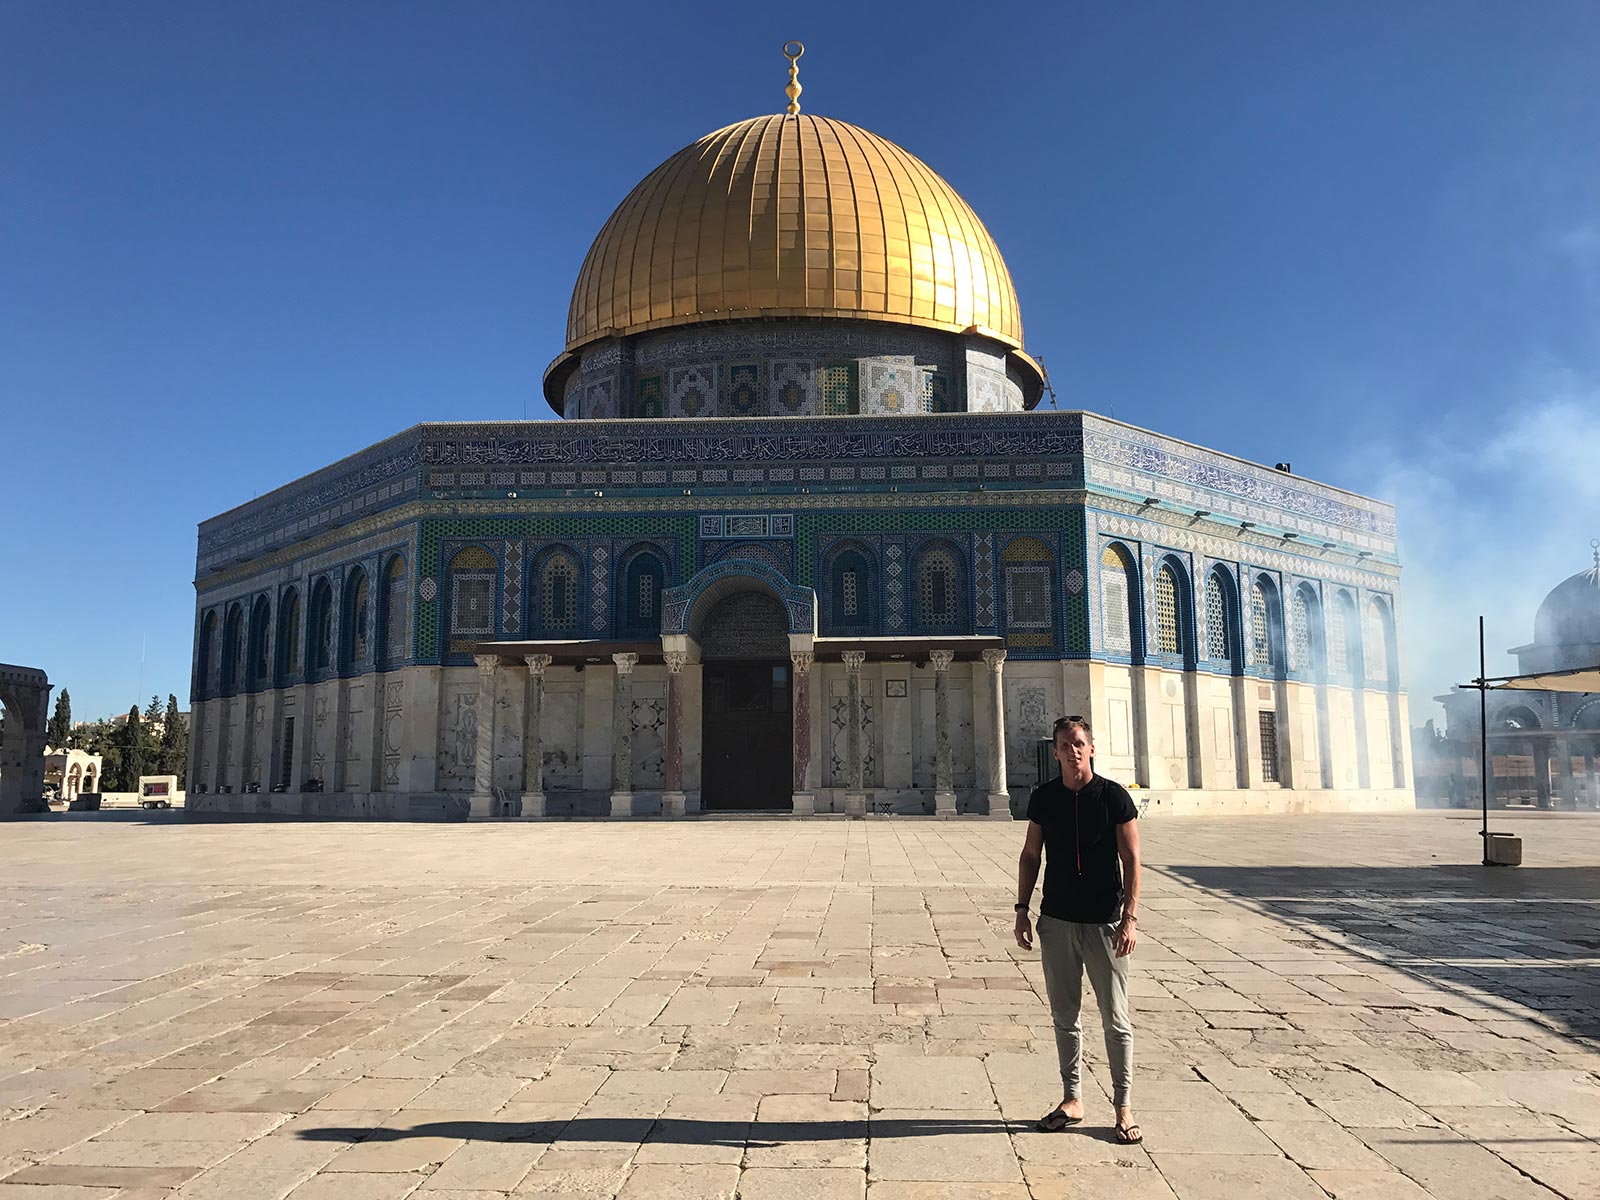 David Simpson at Temple Mount and Dome of the Rock in Jerusalem, Israel. My time in Jerusalem, a special city divided